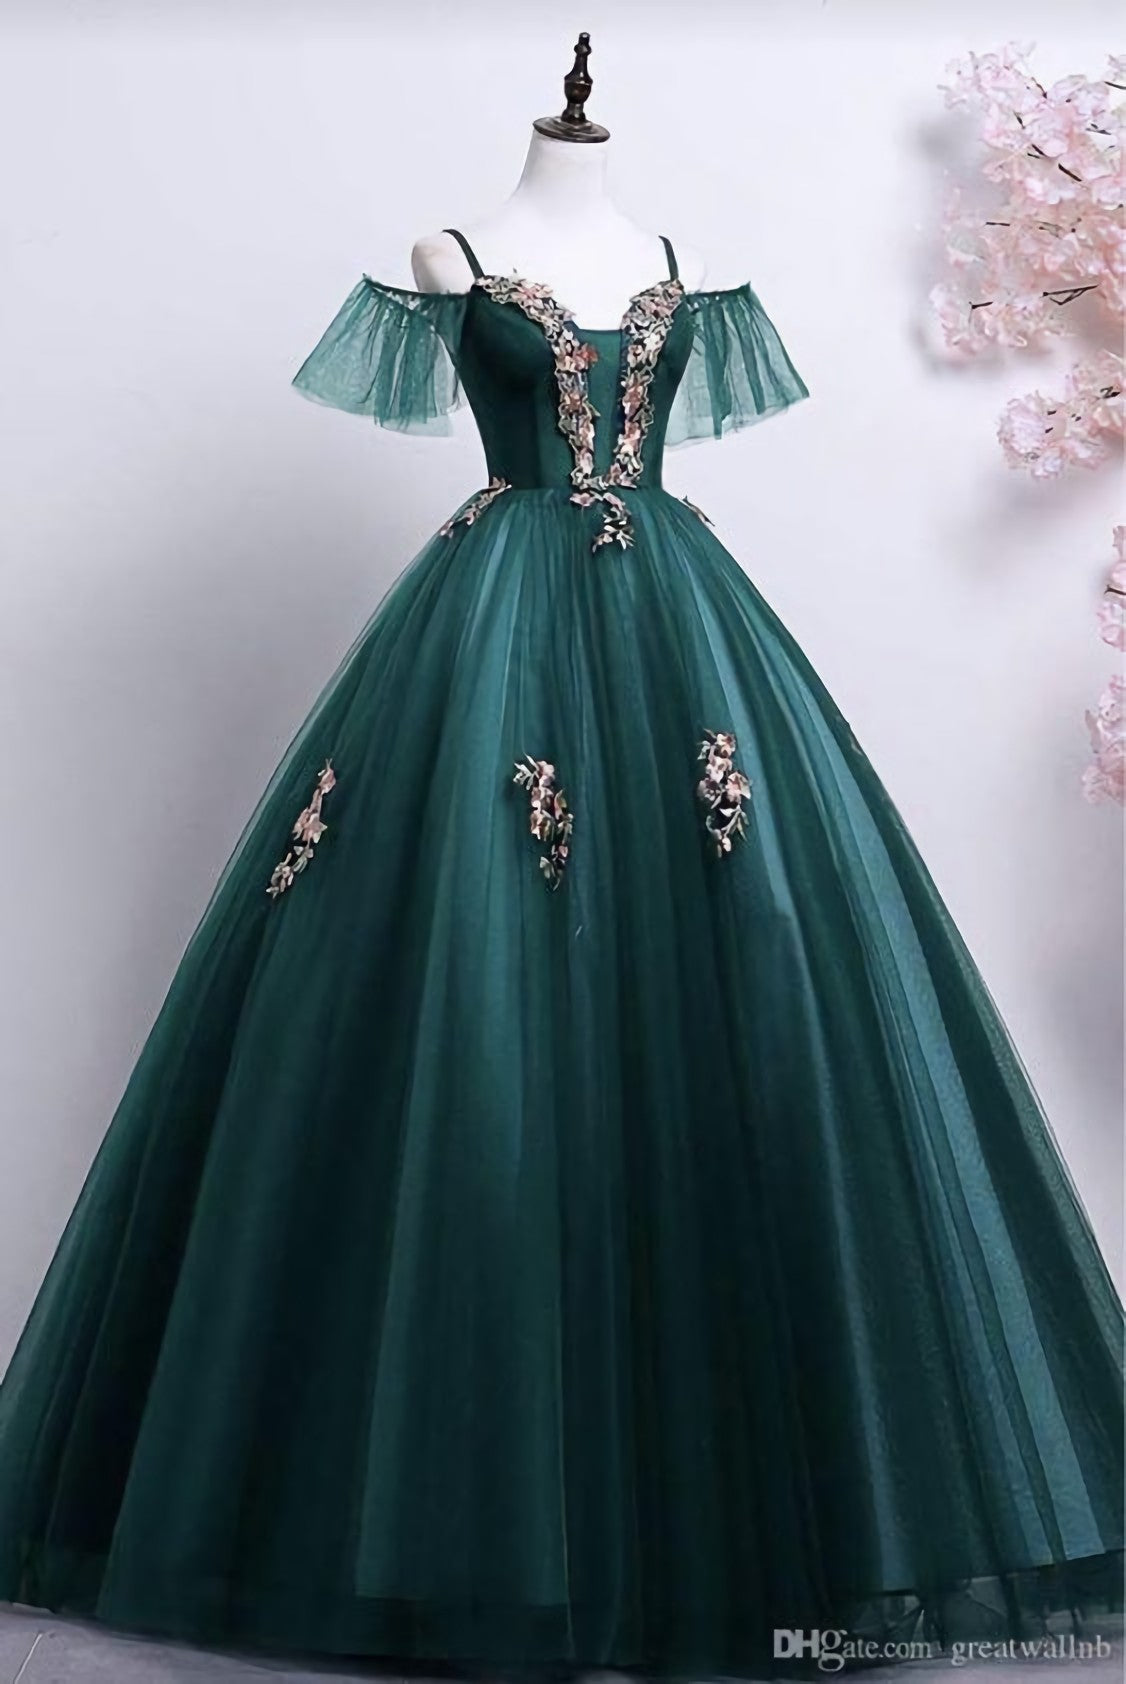 Prom Dresses Aesthetic, Prom Dress, Formal Dress, Evening Gown Green Prom Dress